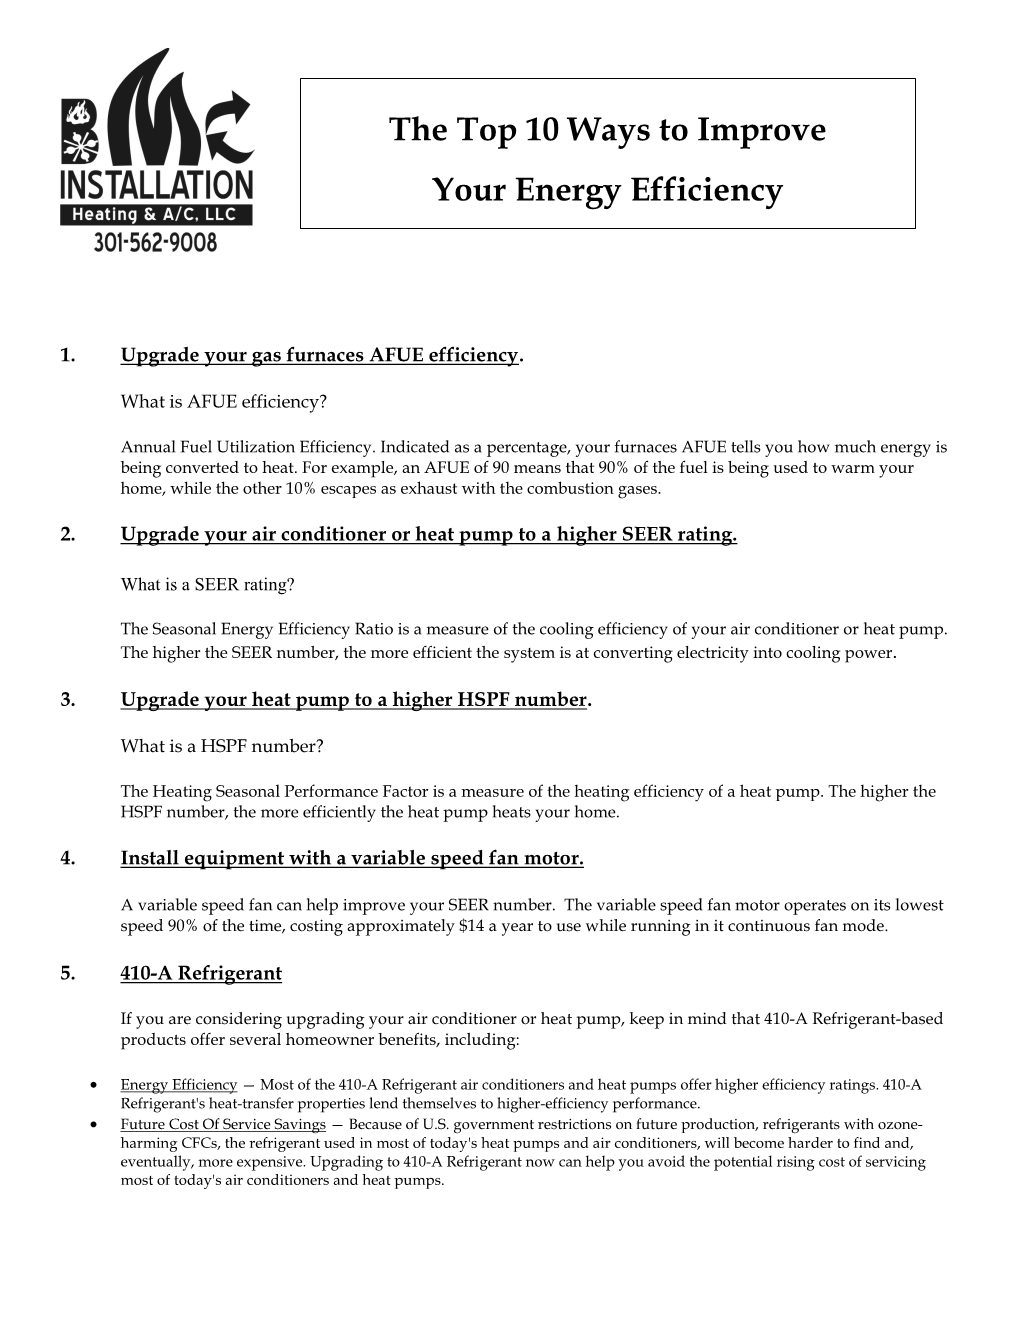 The Top 10 Ways to Improve Your Energy Efficiency